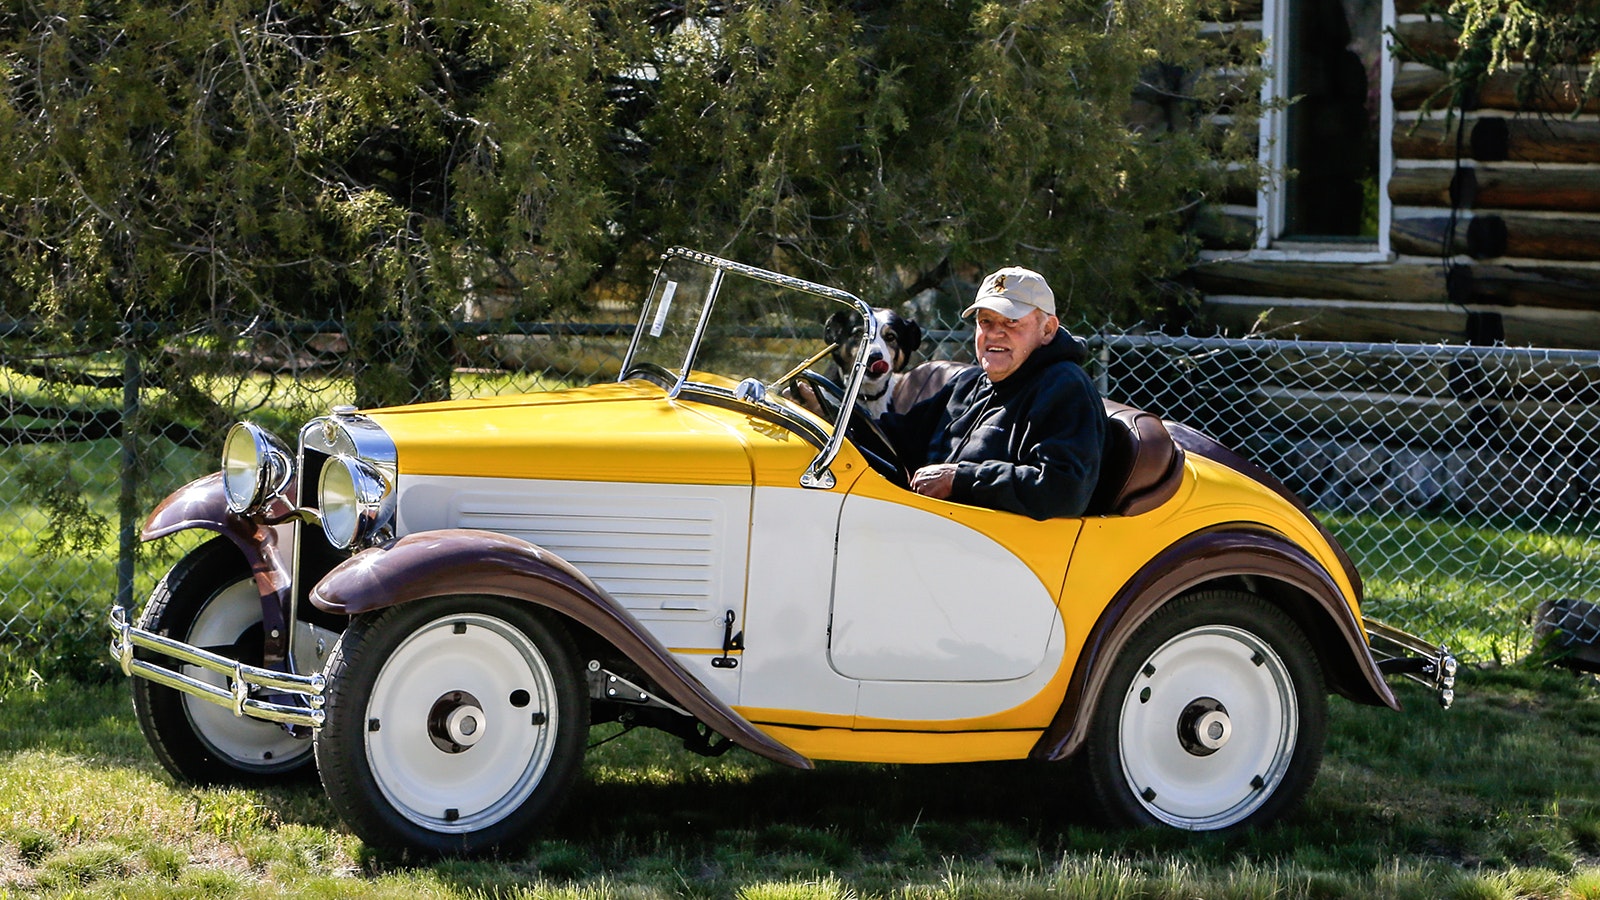 As an 18-year-old Robert “Bob” Harrower did the unthinkable as he and buddies dealt with the aftermath of an United Airlines flight crash at the top of Medicine Bow peak. Here, Harrower sits in a 1930 American Austin that he totally restored and painted yellow and brown to match the University of Wyoming colors.